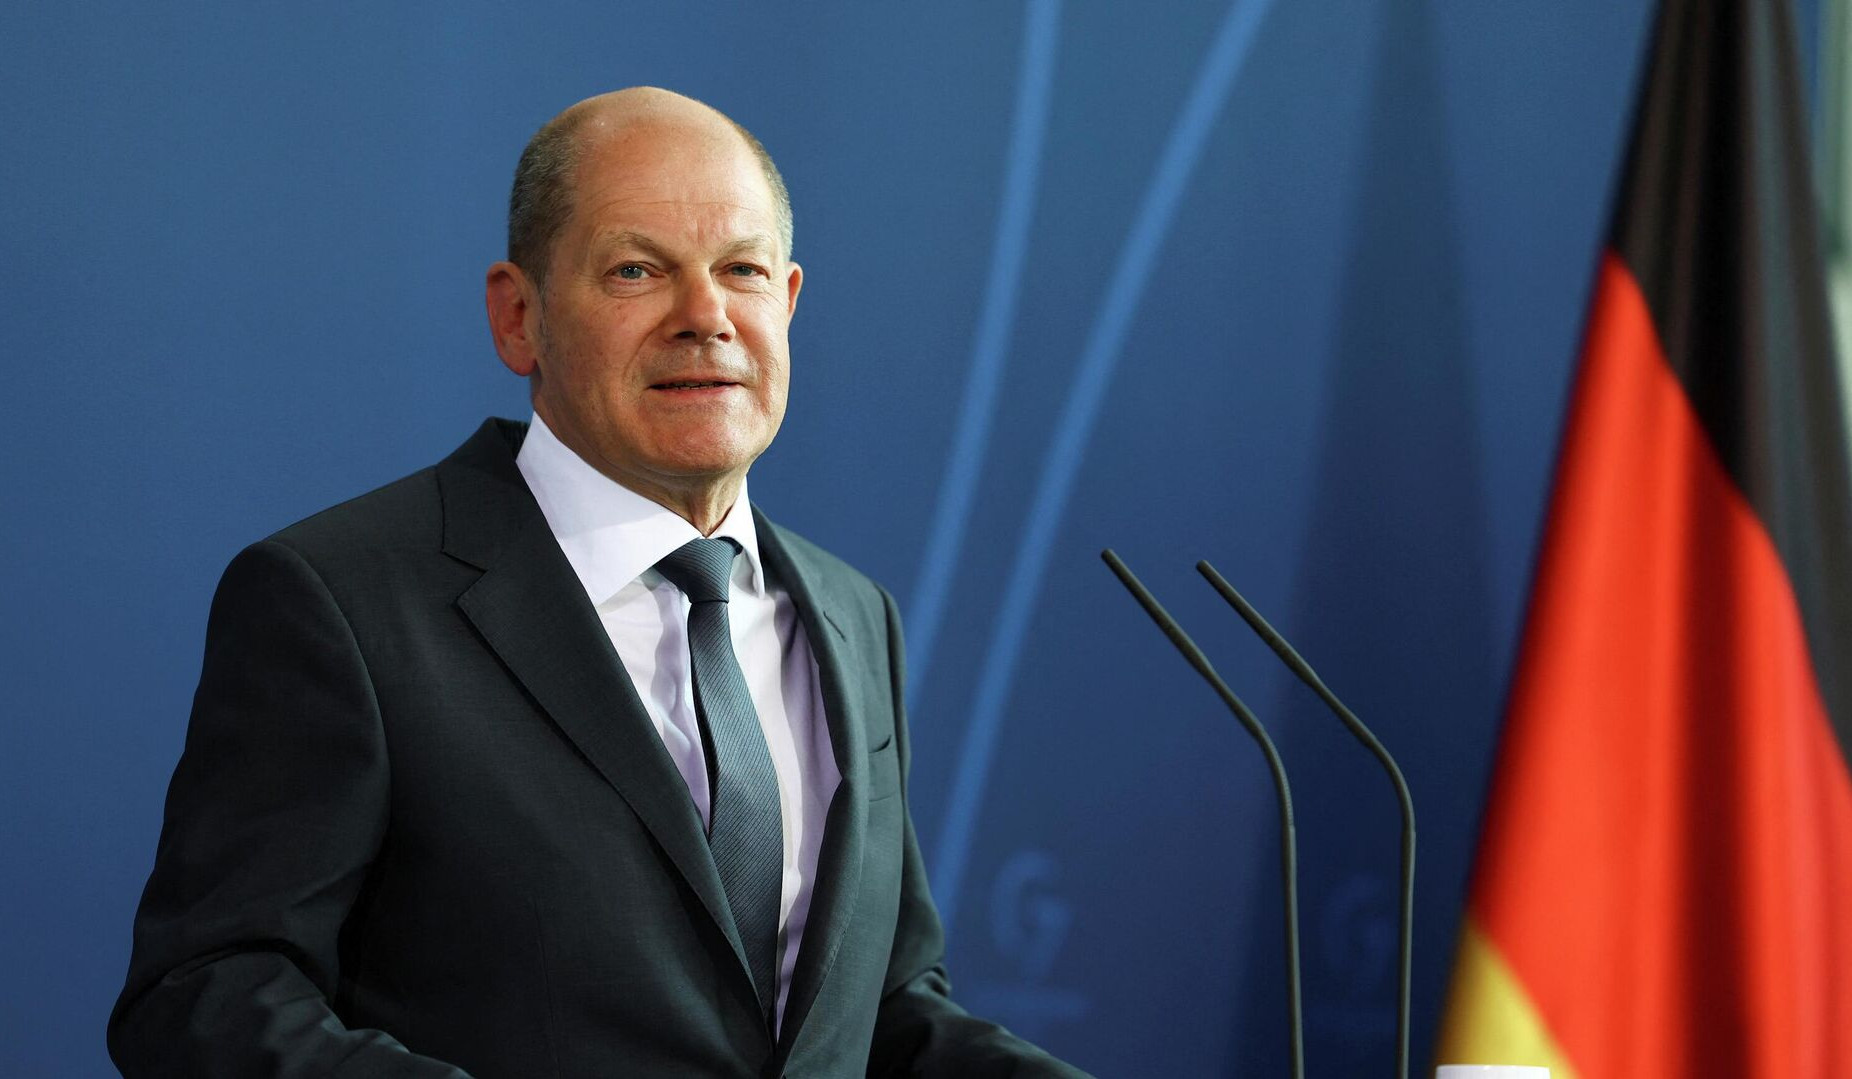 Germany supplying Ukraine with advanced weapons German army doesn't yet possess itself: Scholz